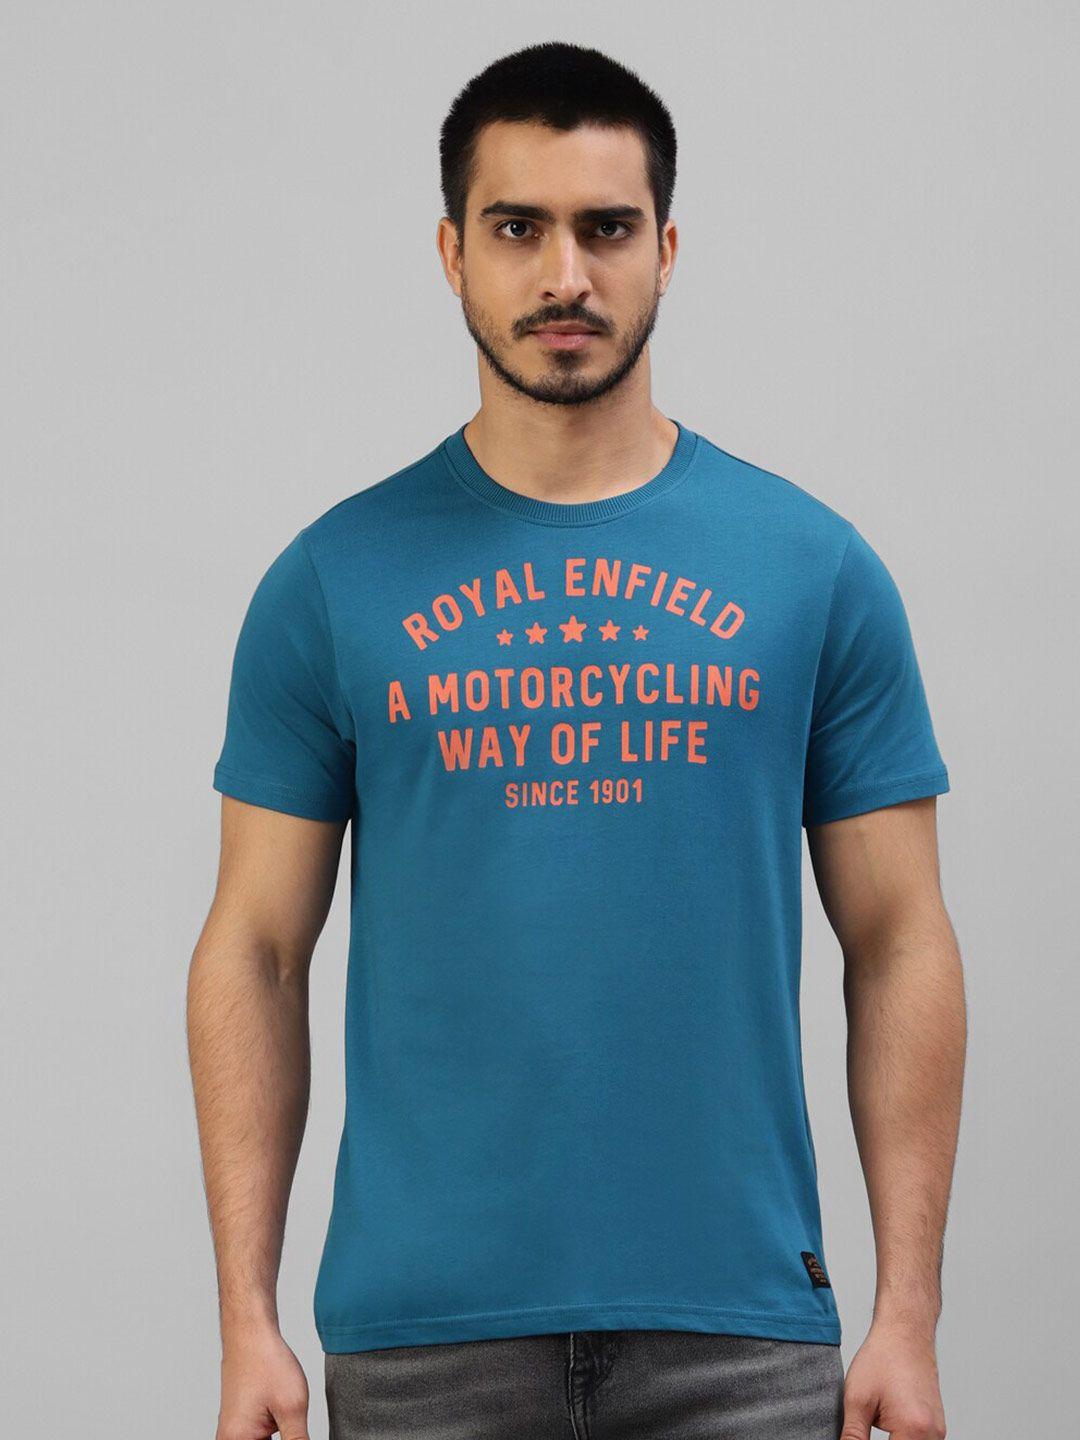 royal enfield typography printed cotton t-shirt